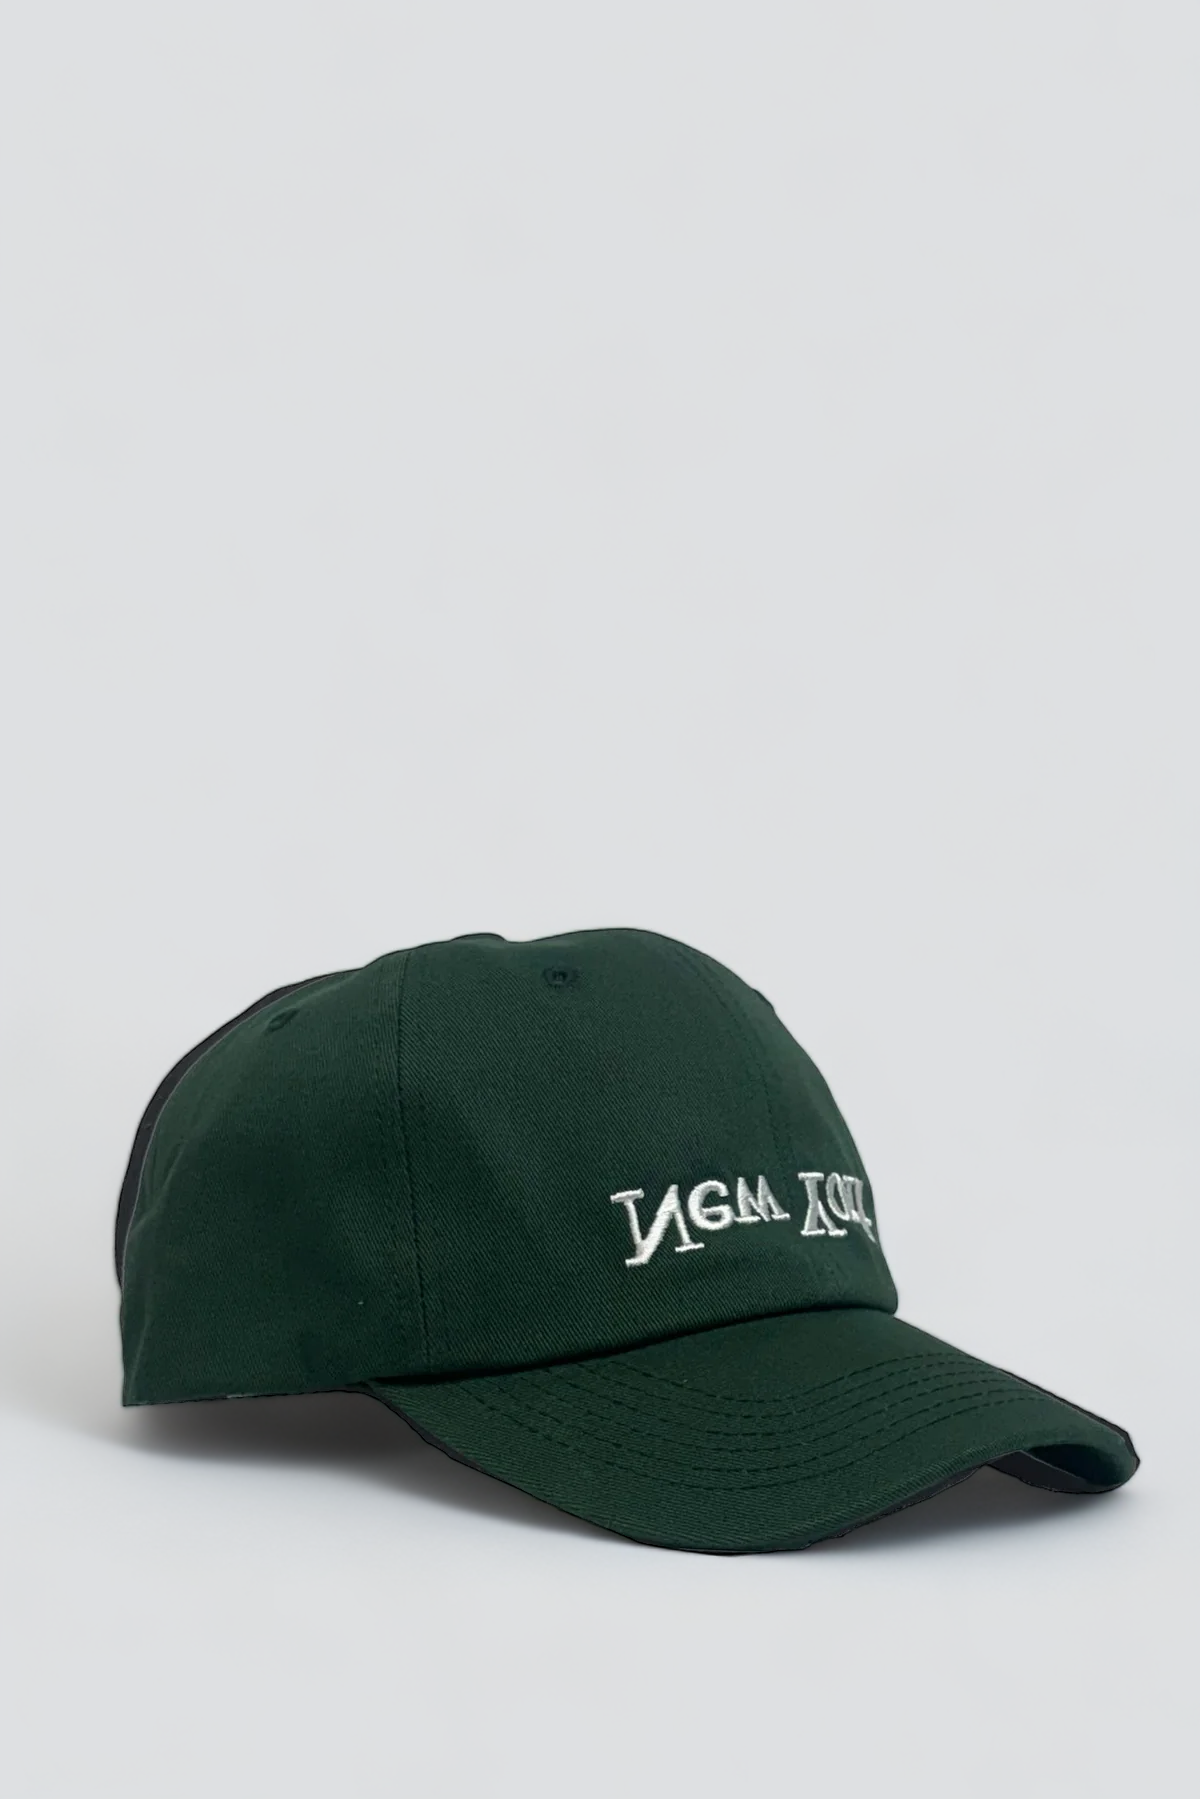 New York Embroidered Hat - Forest Green/White